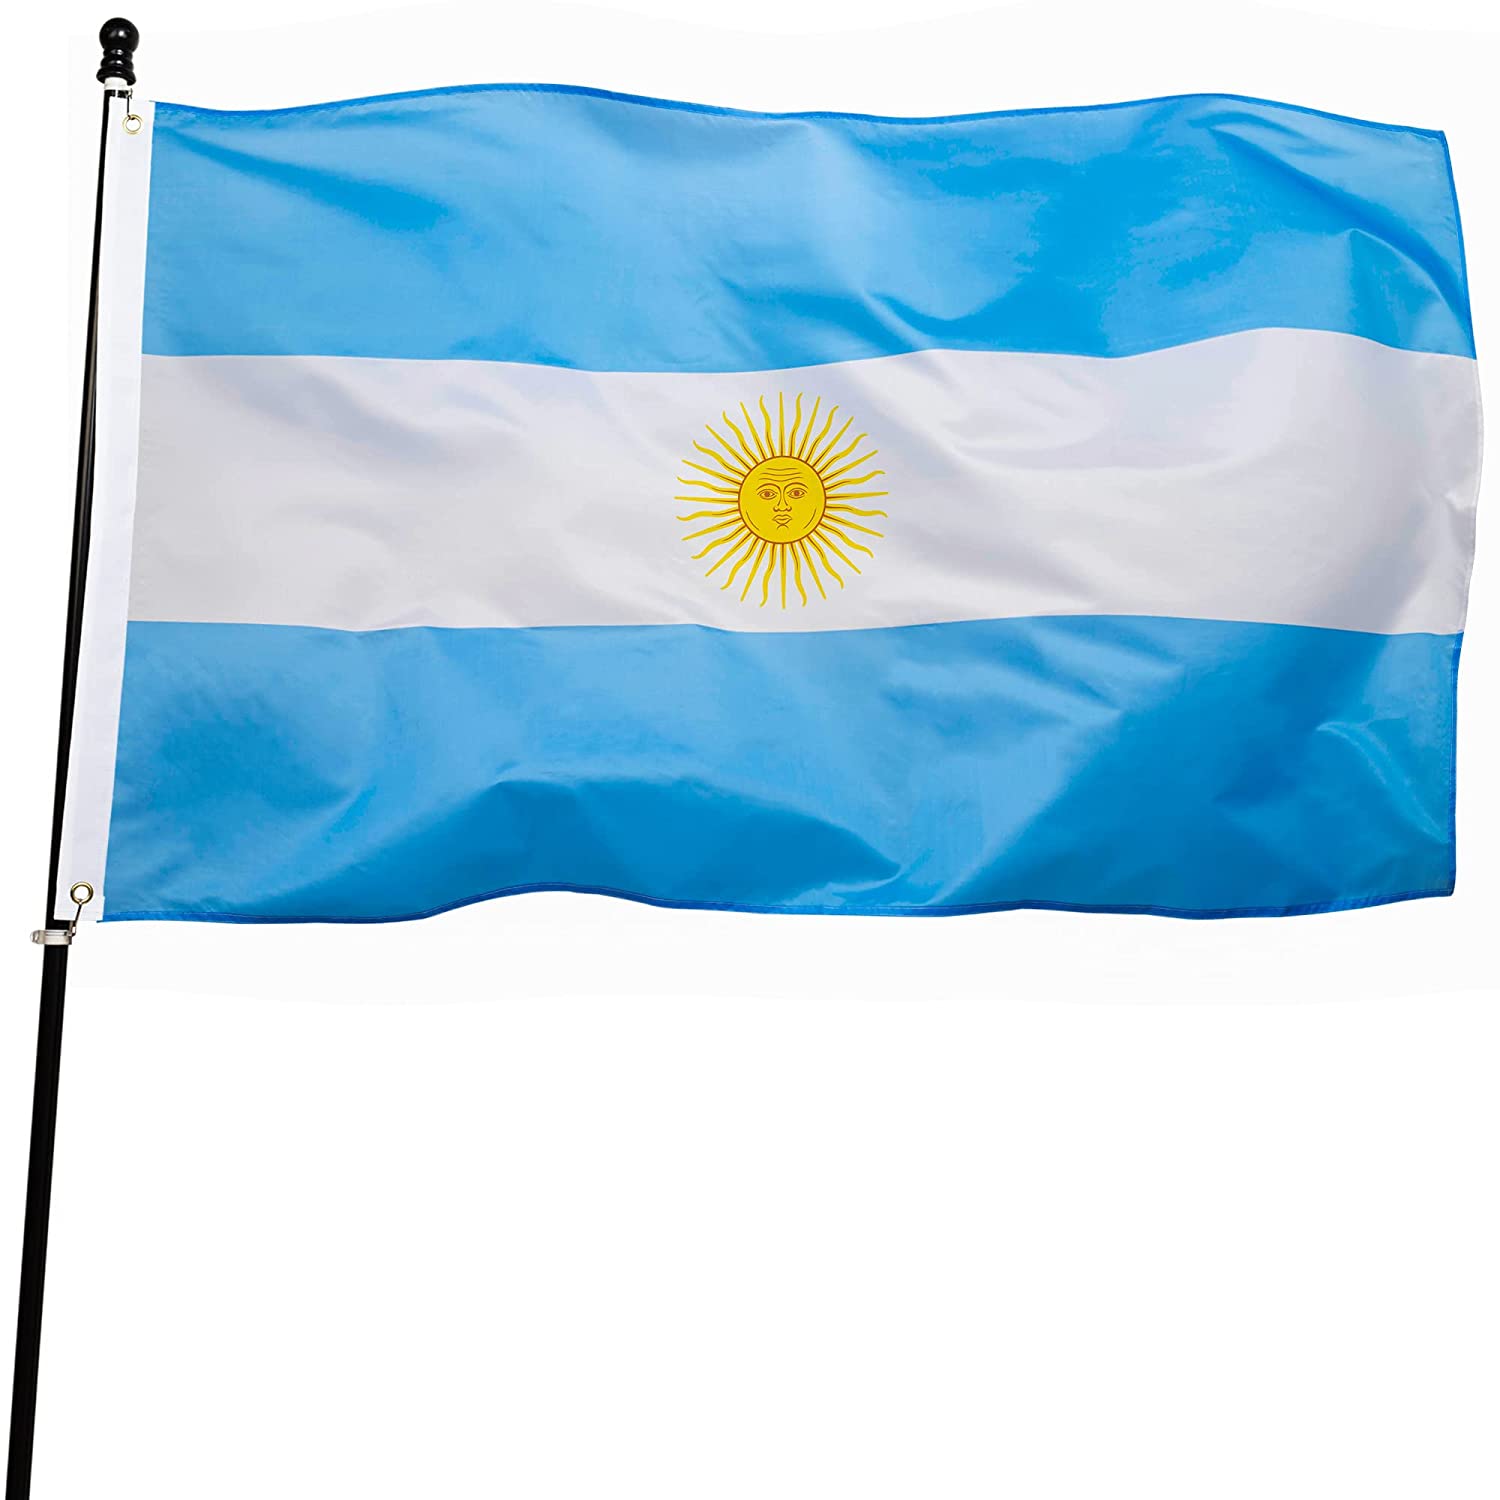 World Cup 2022 - Argentina Flag